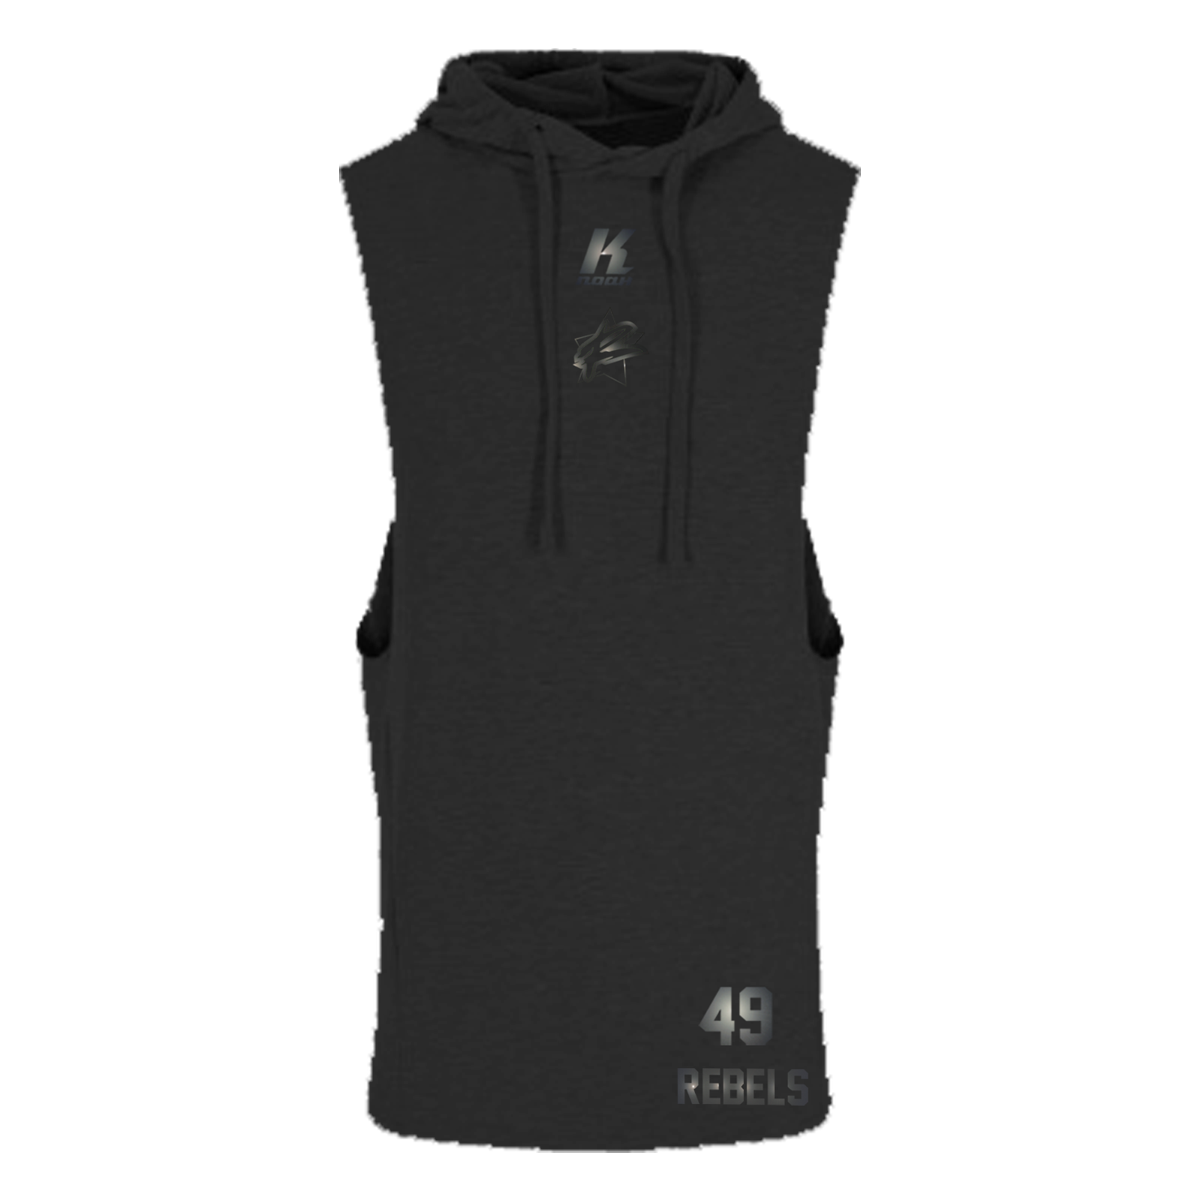 Rebels "Blackline" Sleeveless Muscle Hoodie JC053 with Playernumber or Initials